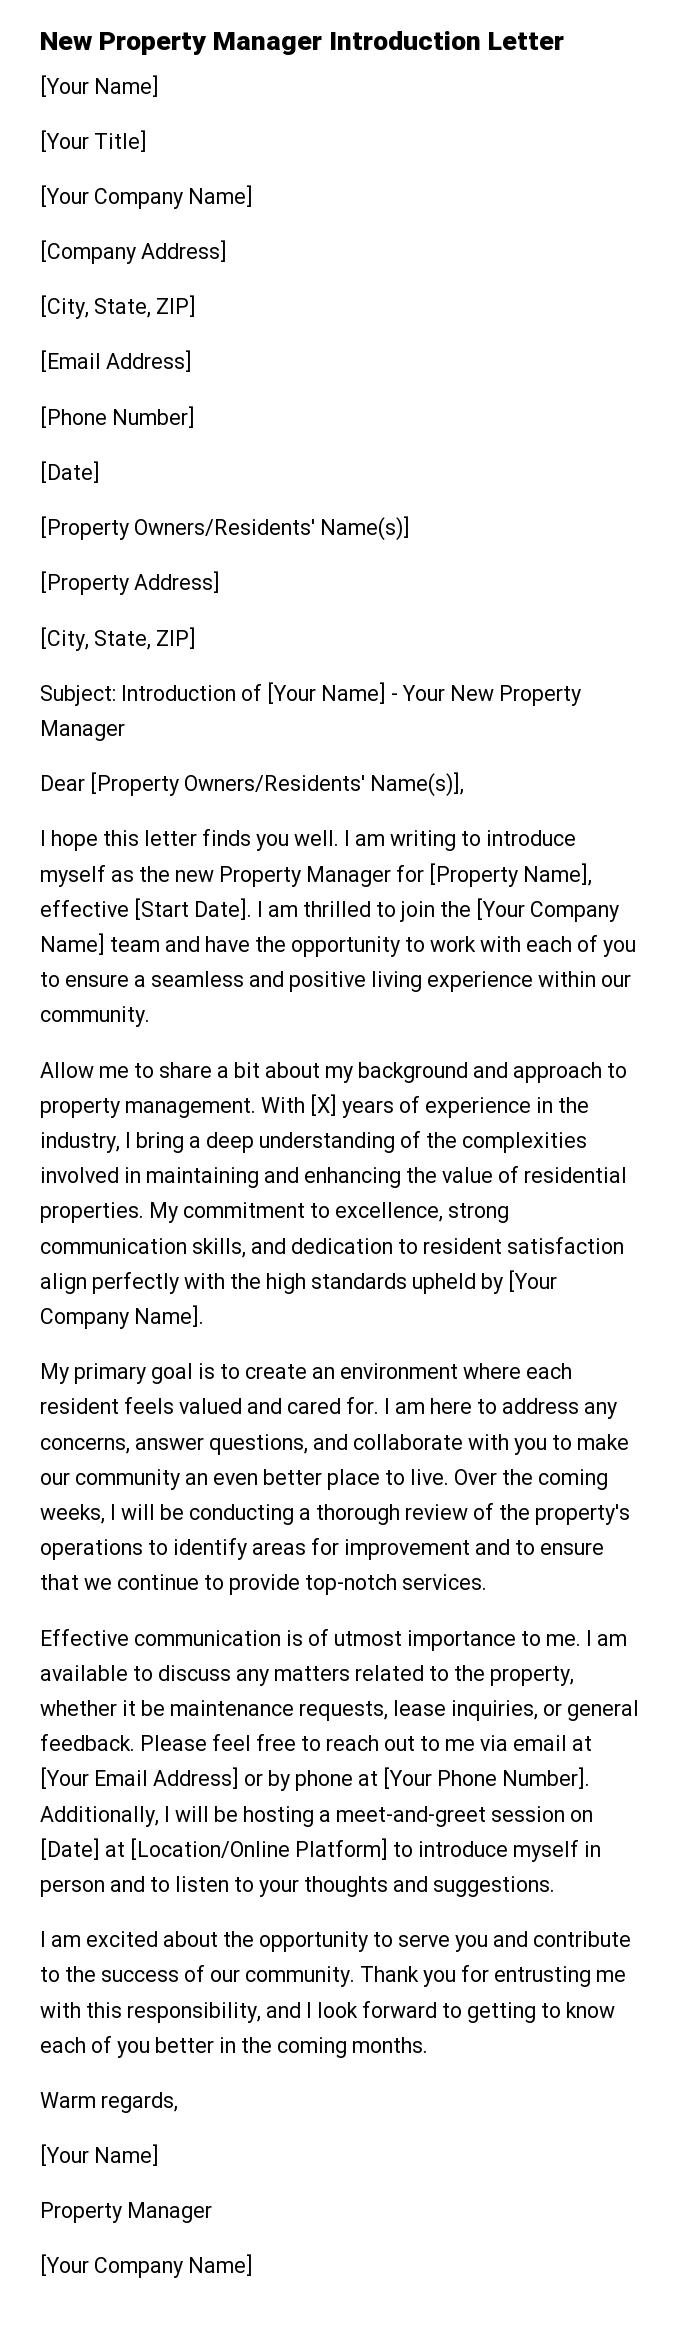 New Property Manager Introduction Letter